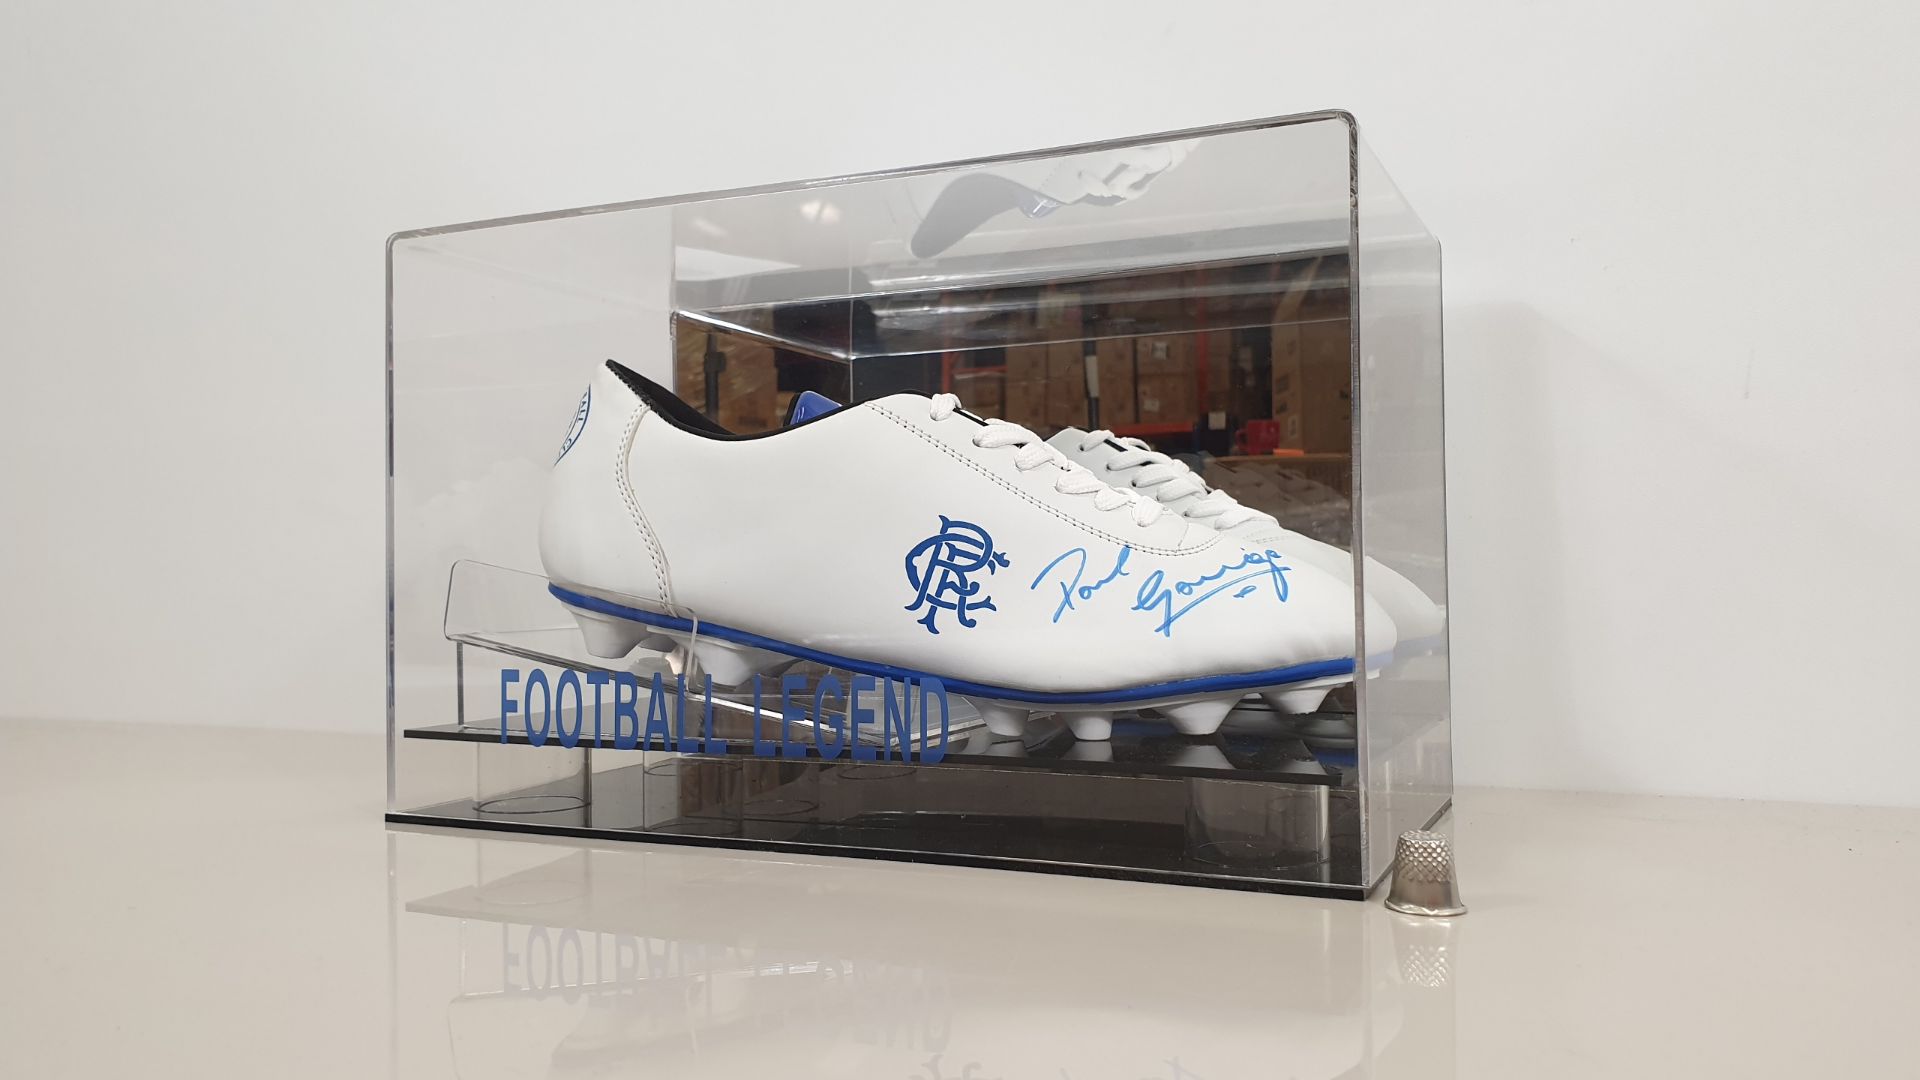 PAUL GASCOIGNE PERSONALLY SIGNED RANGERS BOOT IN DISPLAY CASE - GOOD CONDITION WITH CERTIFICATE OF